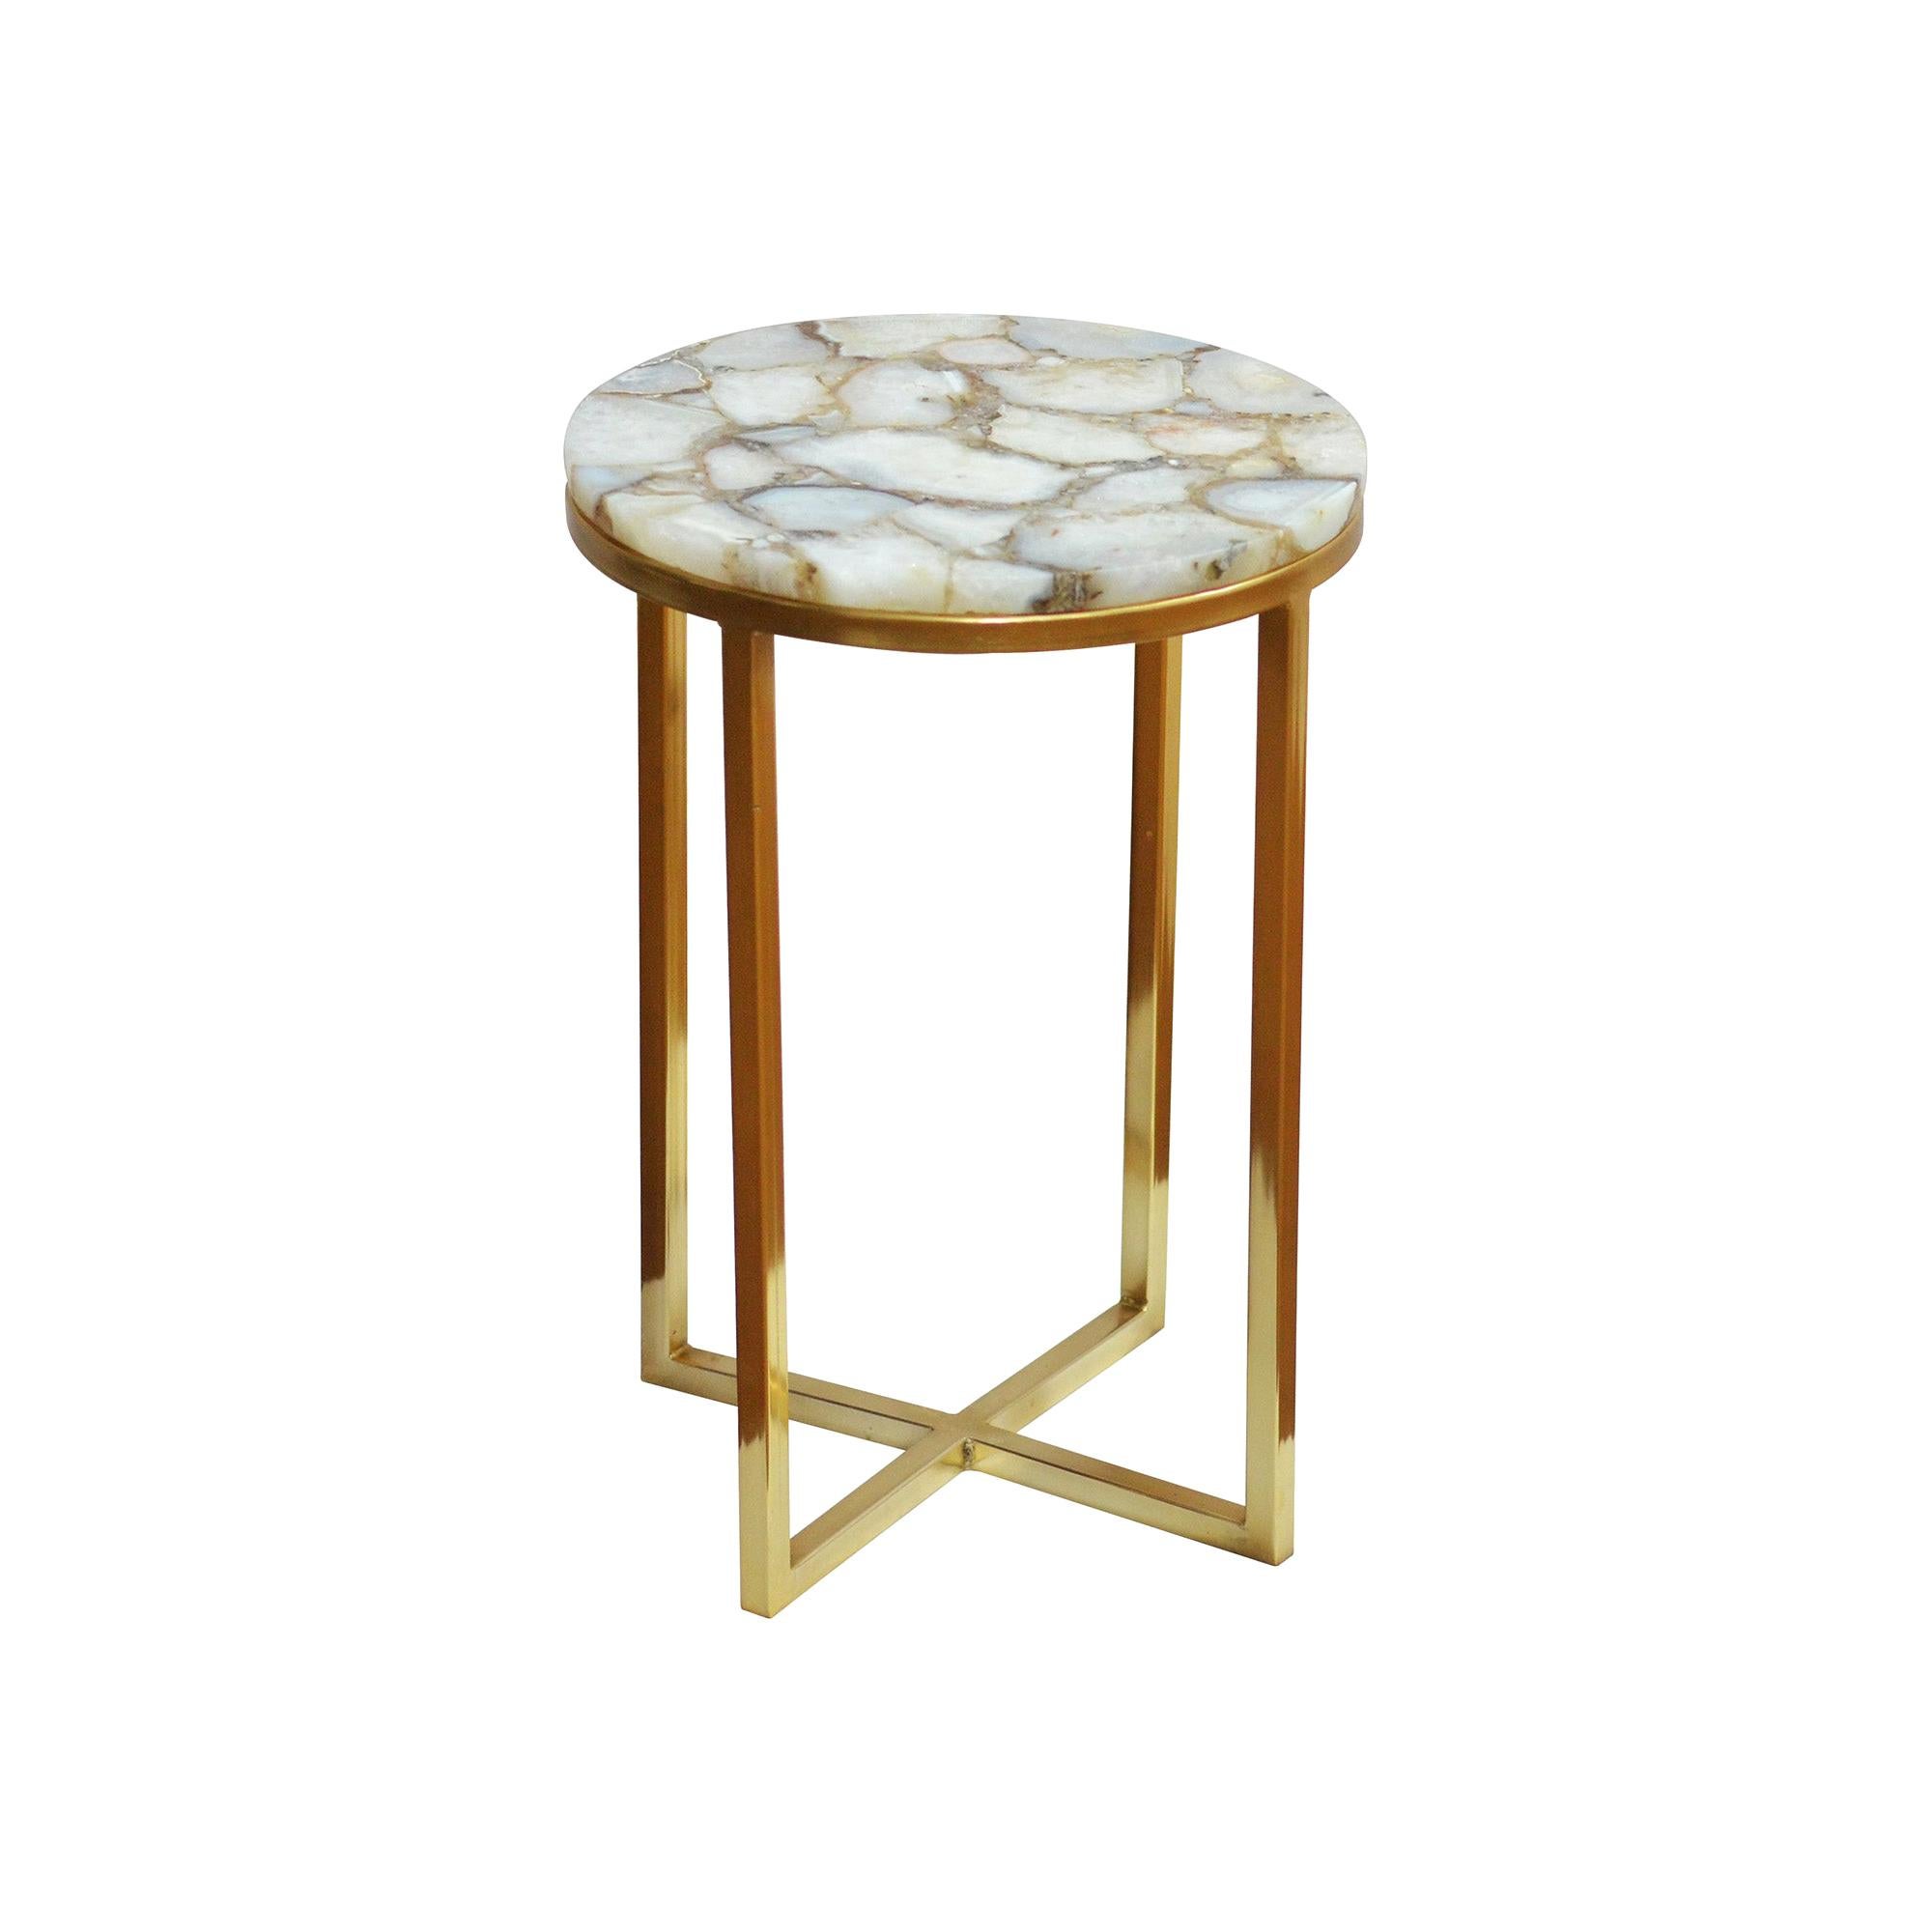 Salida Table in White and Gold Steel by CuratedKravet